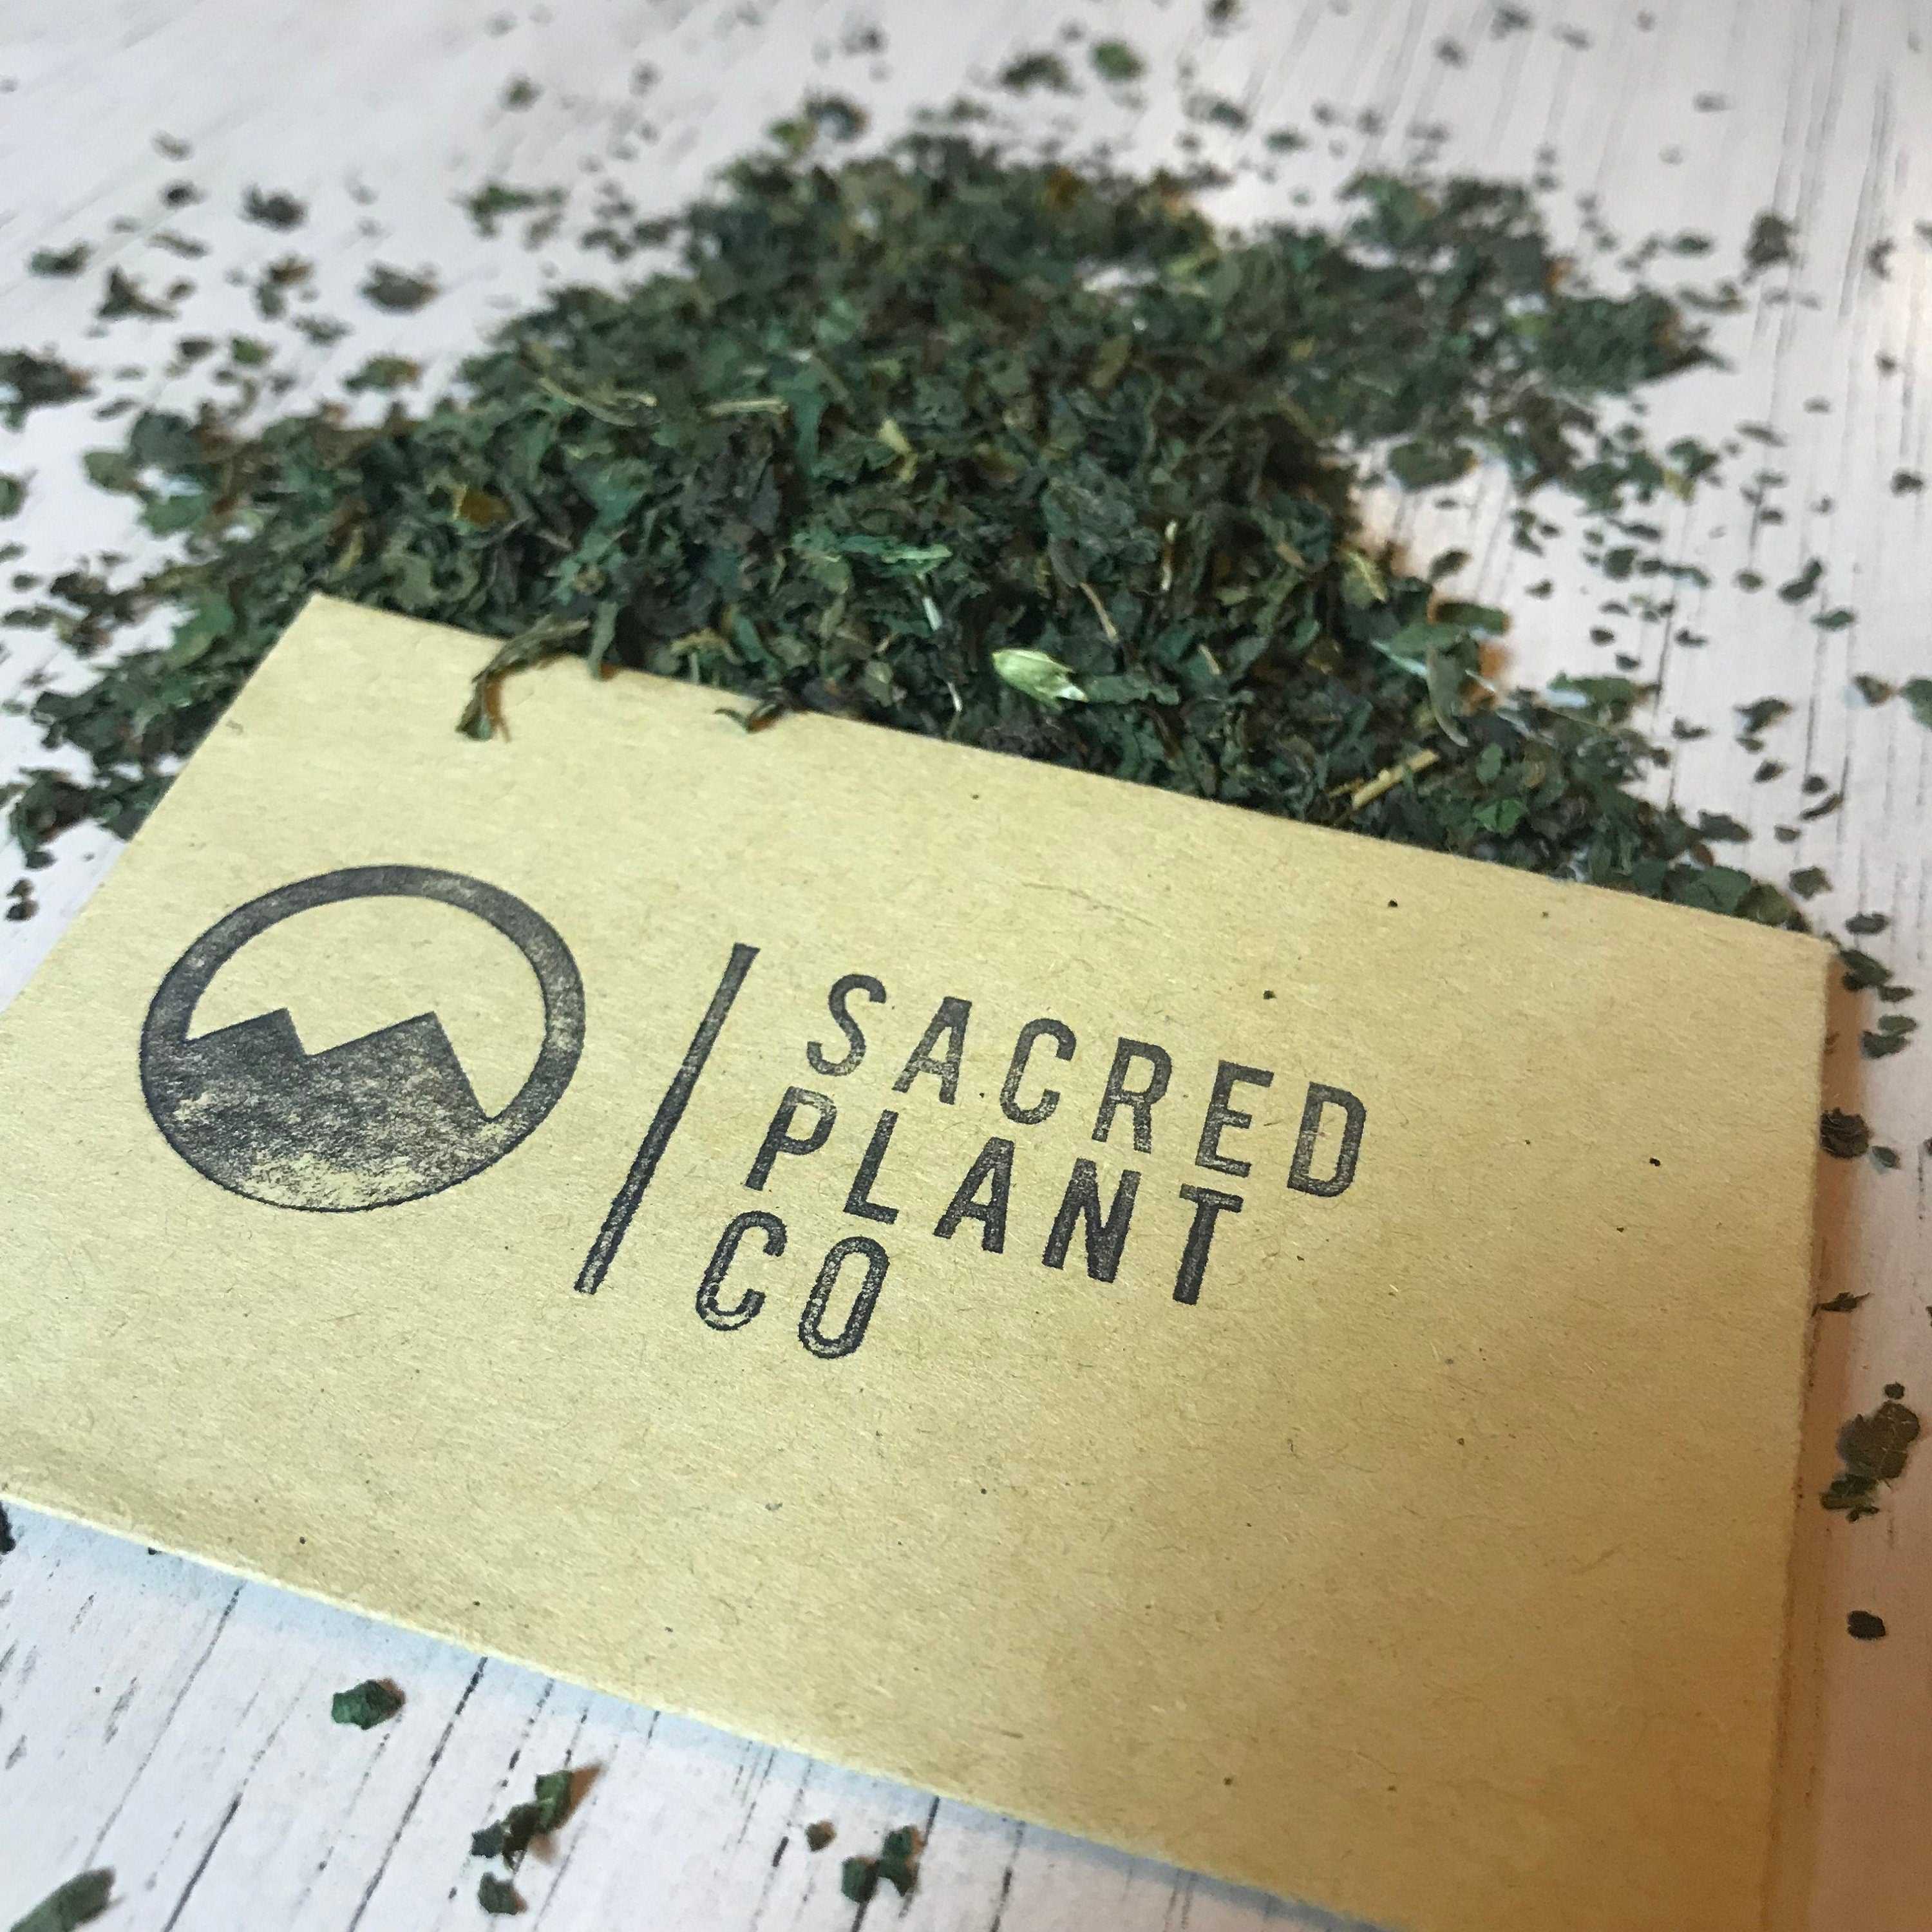 An angled view of a natural-colored business card for Sacred Plant Co, resting on a white painted wooden surface partially covered by loose dried stinging nettle leaves. The card is printed with the company&